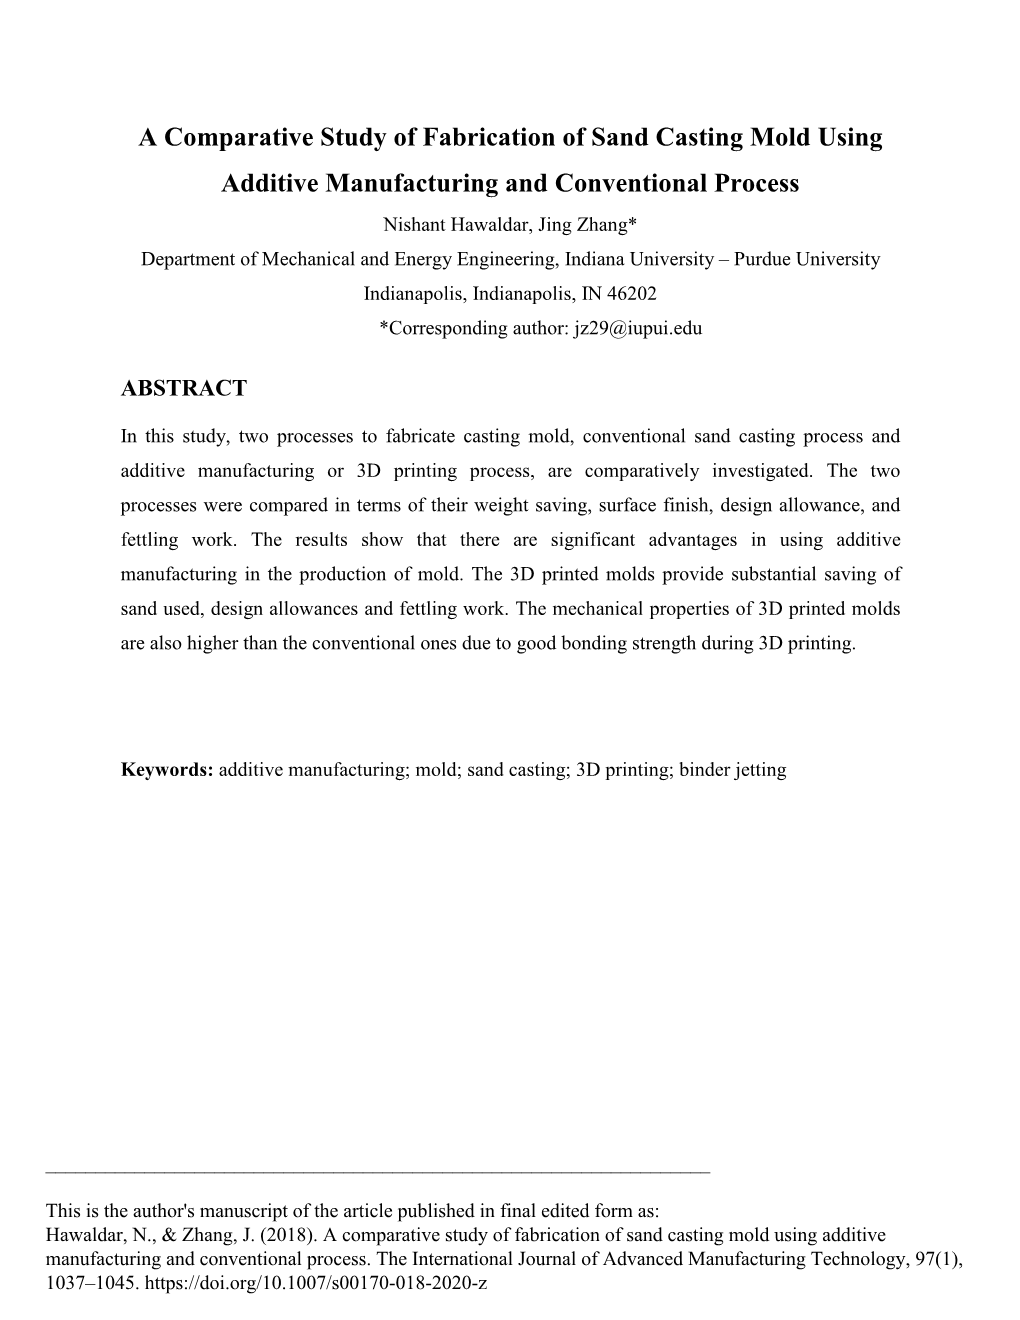 A Comparative Study of Fabrication of Sand Casting Mold Using Additive Manufacturing and Conventional Process